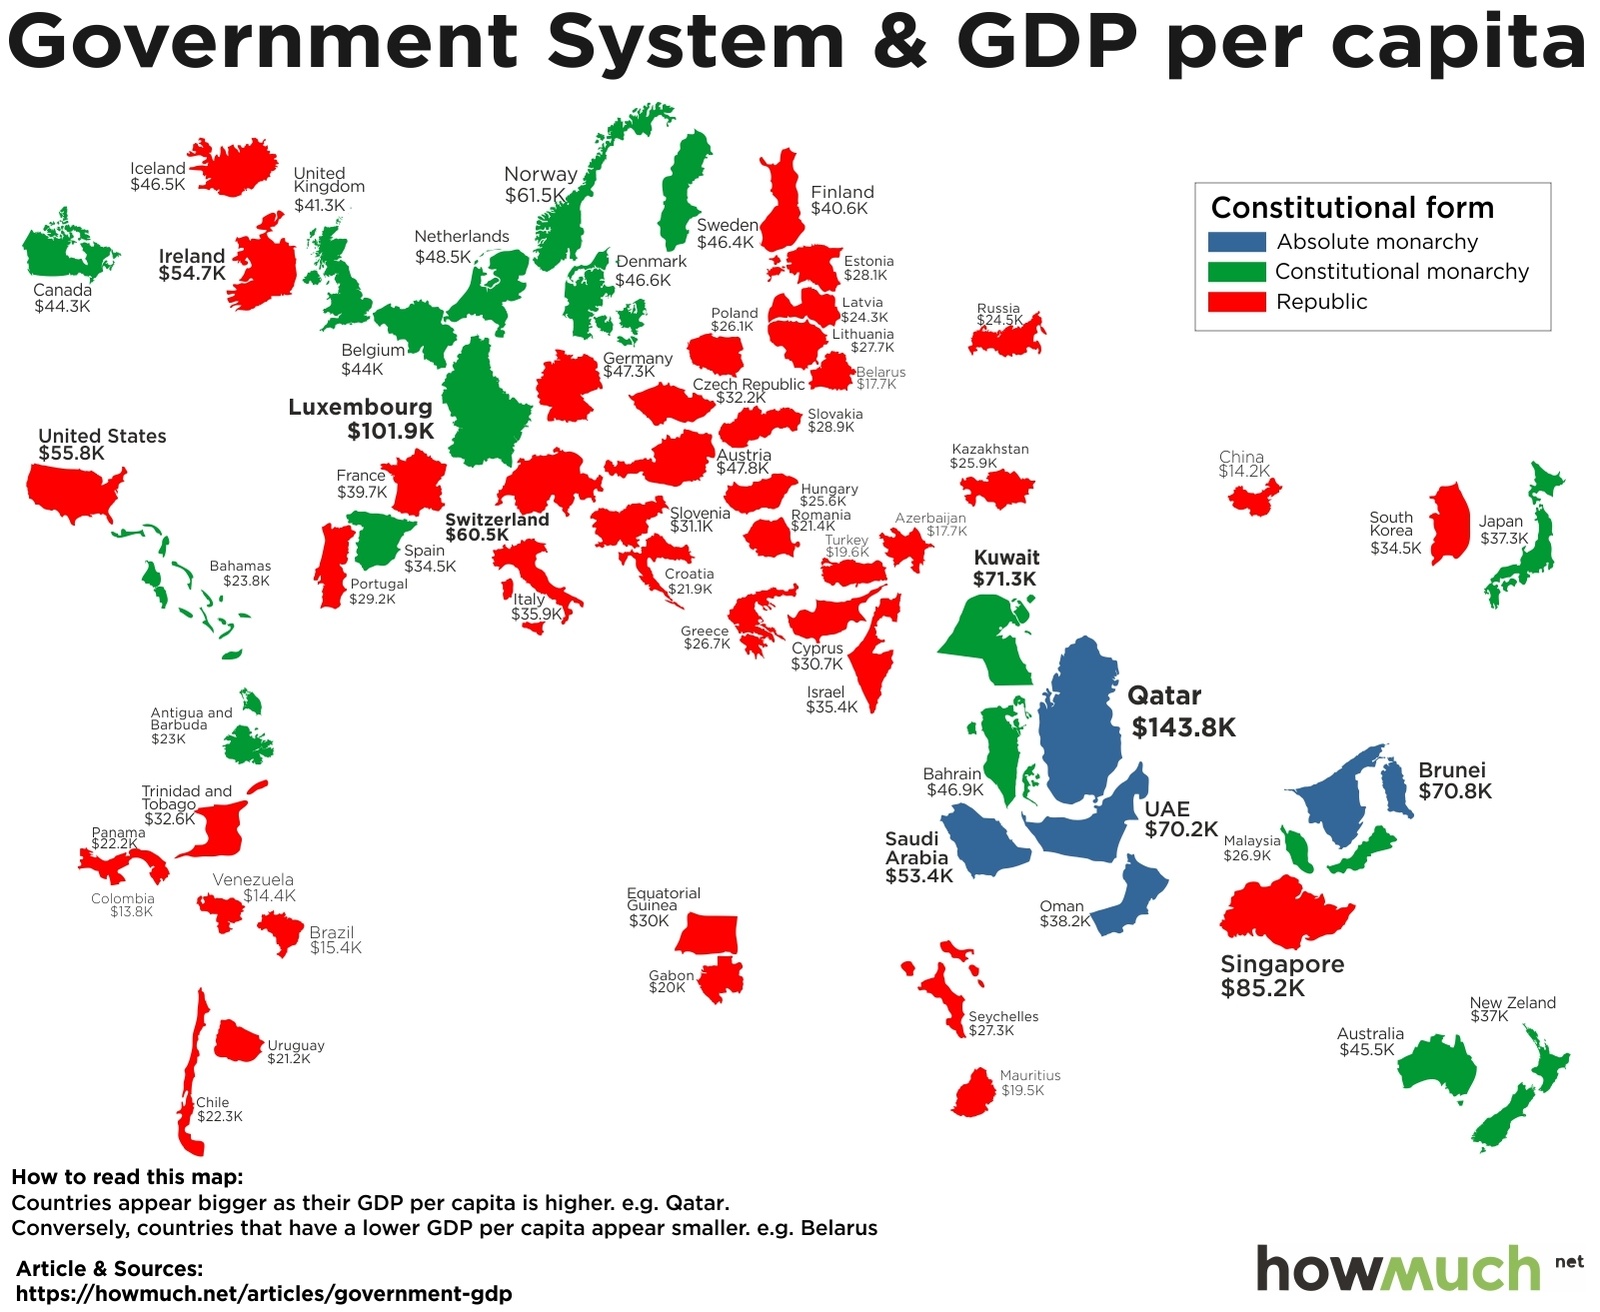 Which Government System Is The Best For People’s Wealth?